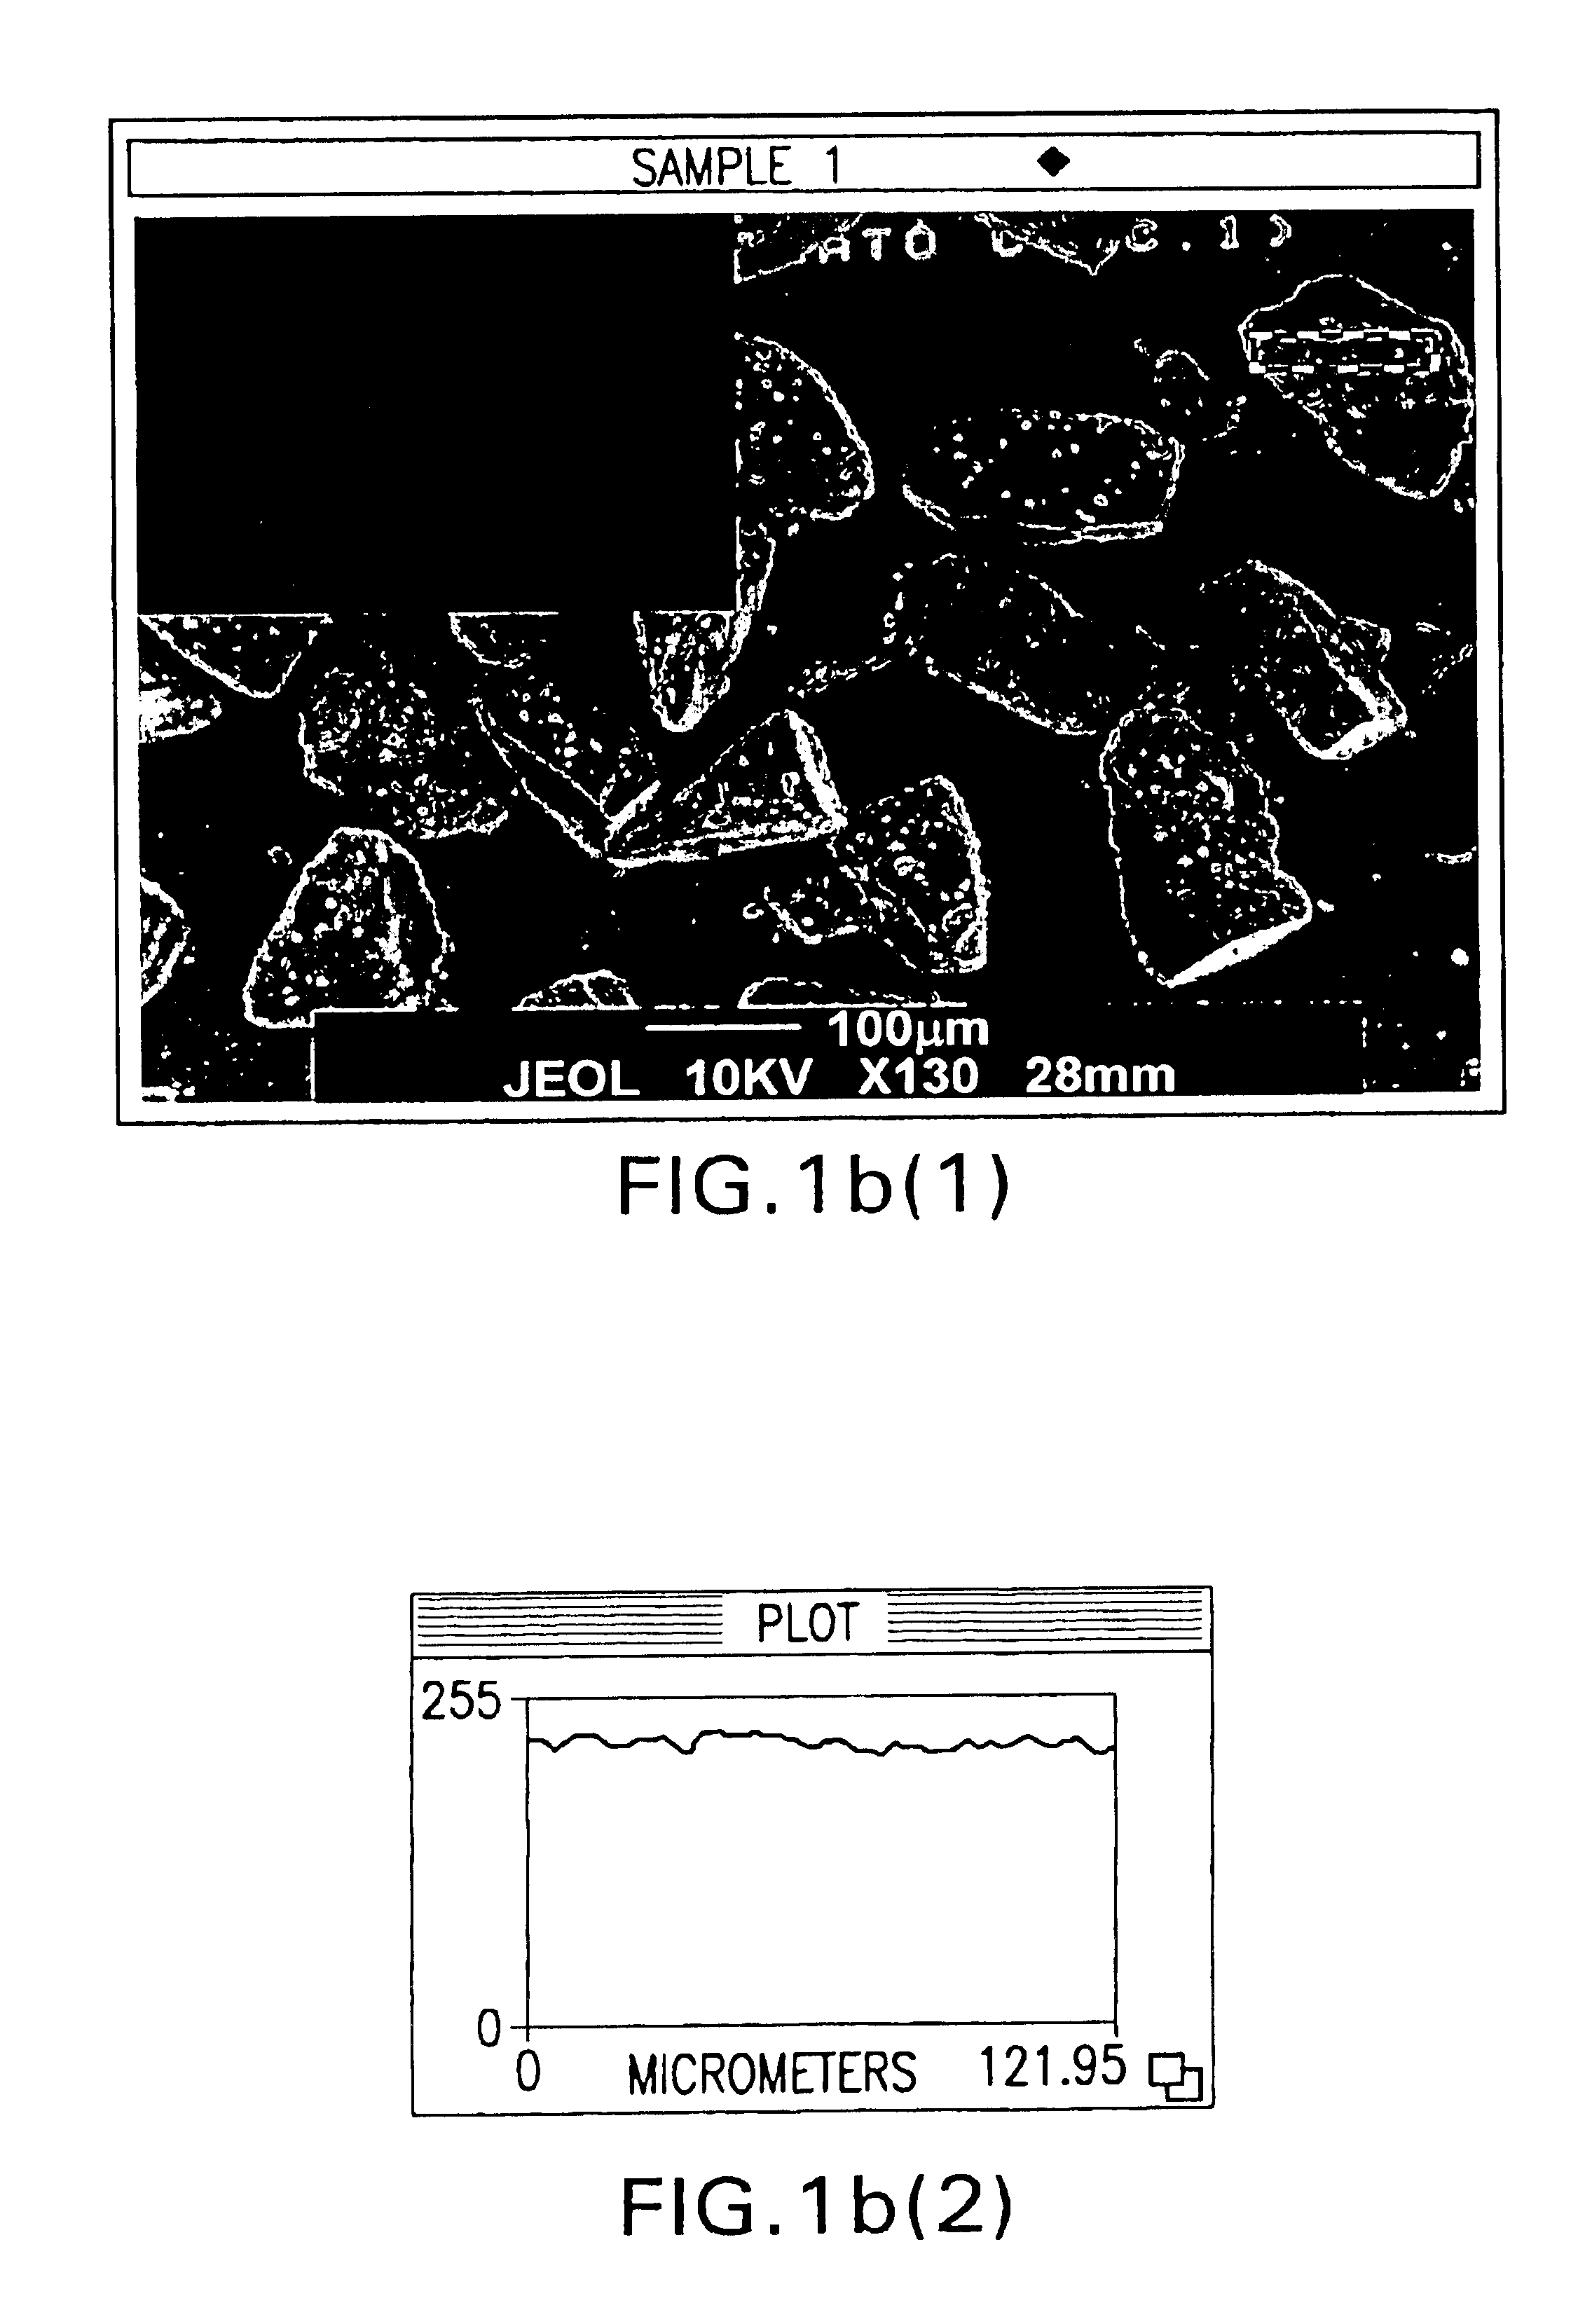 Powder particles with smooth surface for use in inhalation therapy